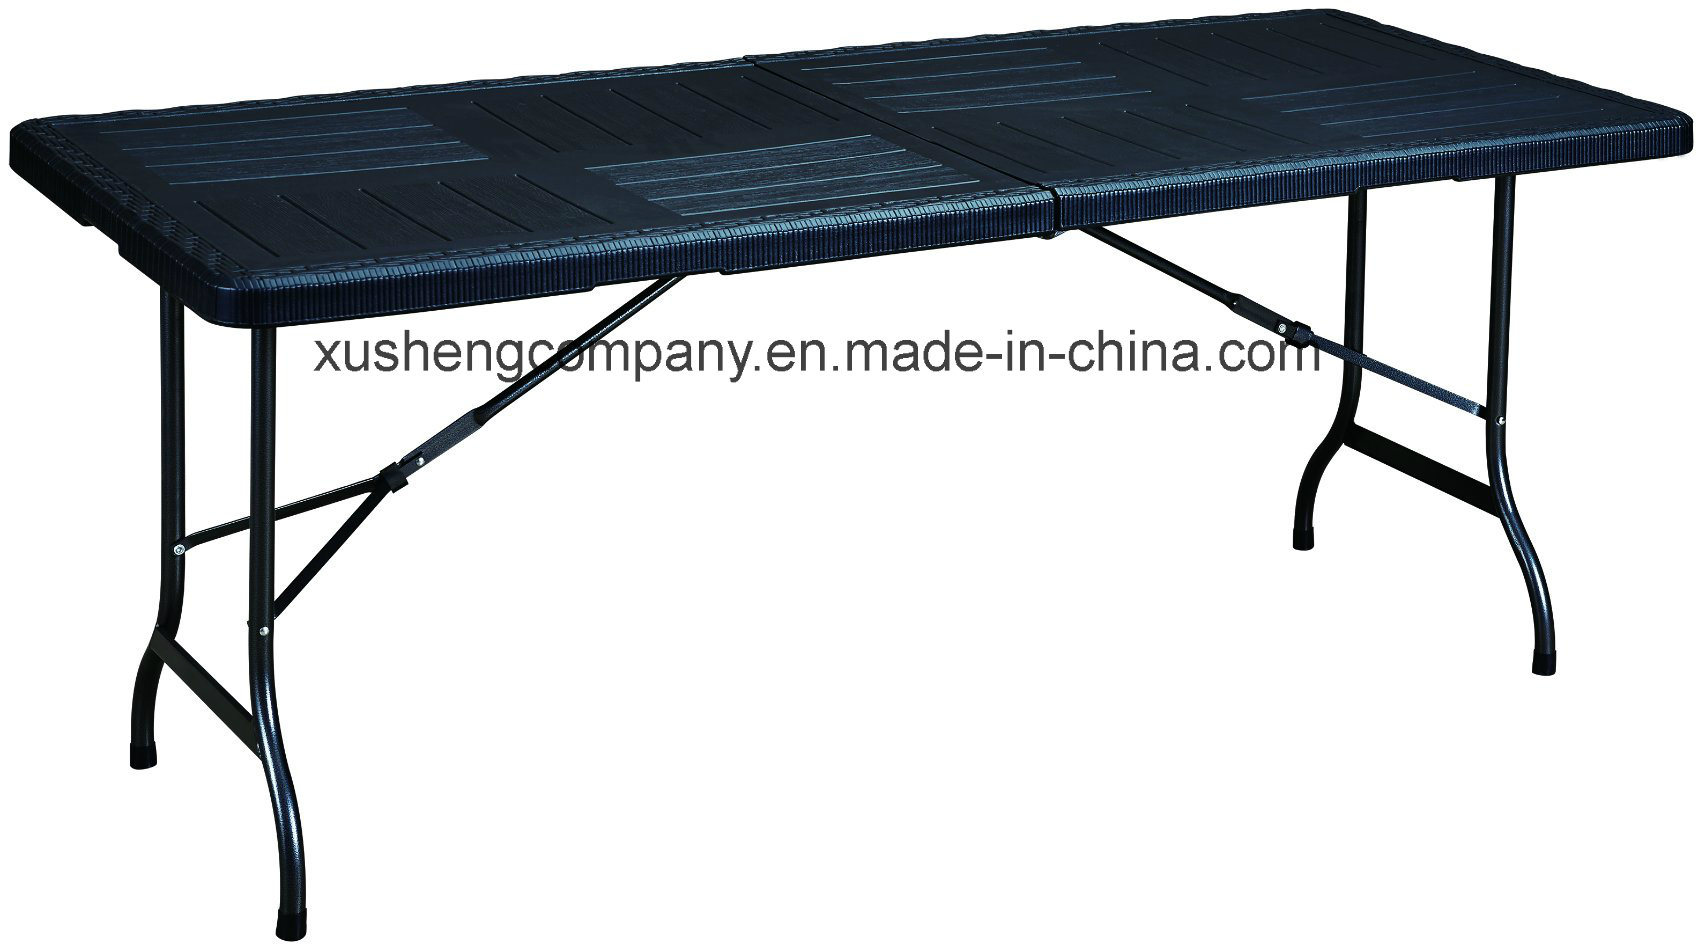 New Style of Rattan Design Plastic Folding Table for Outdoor Use